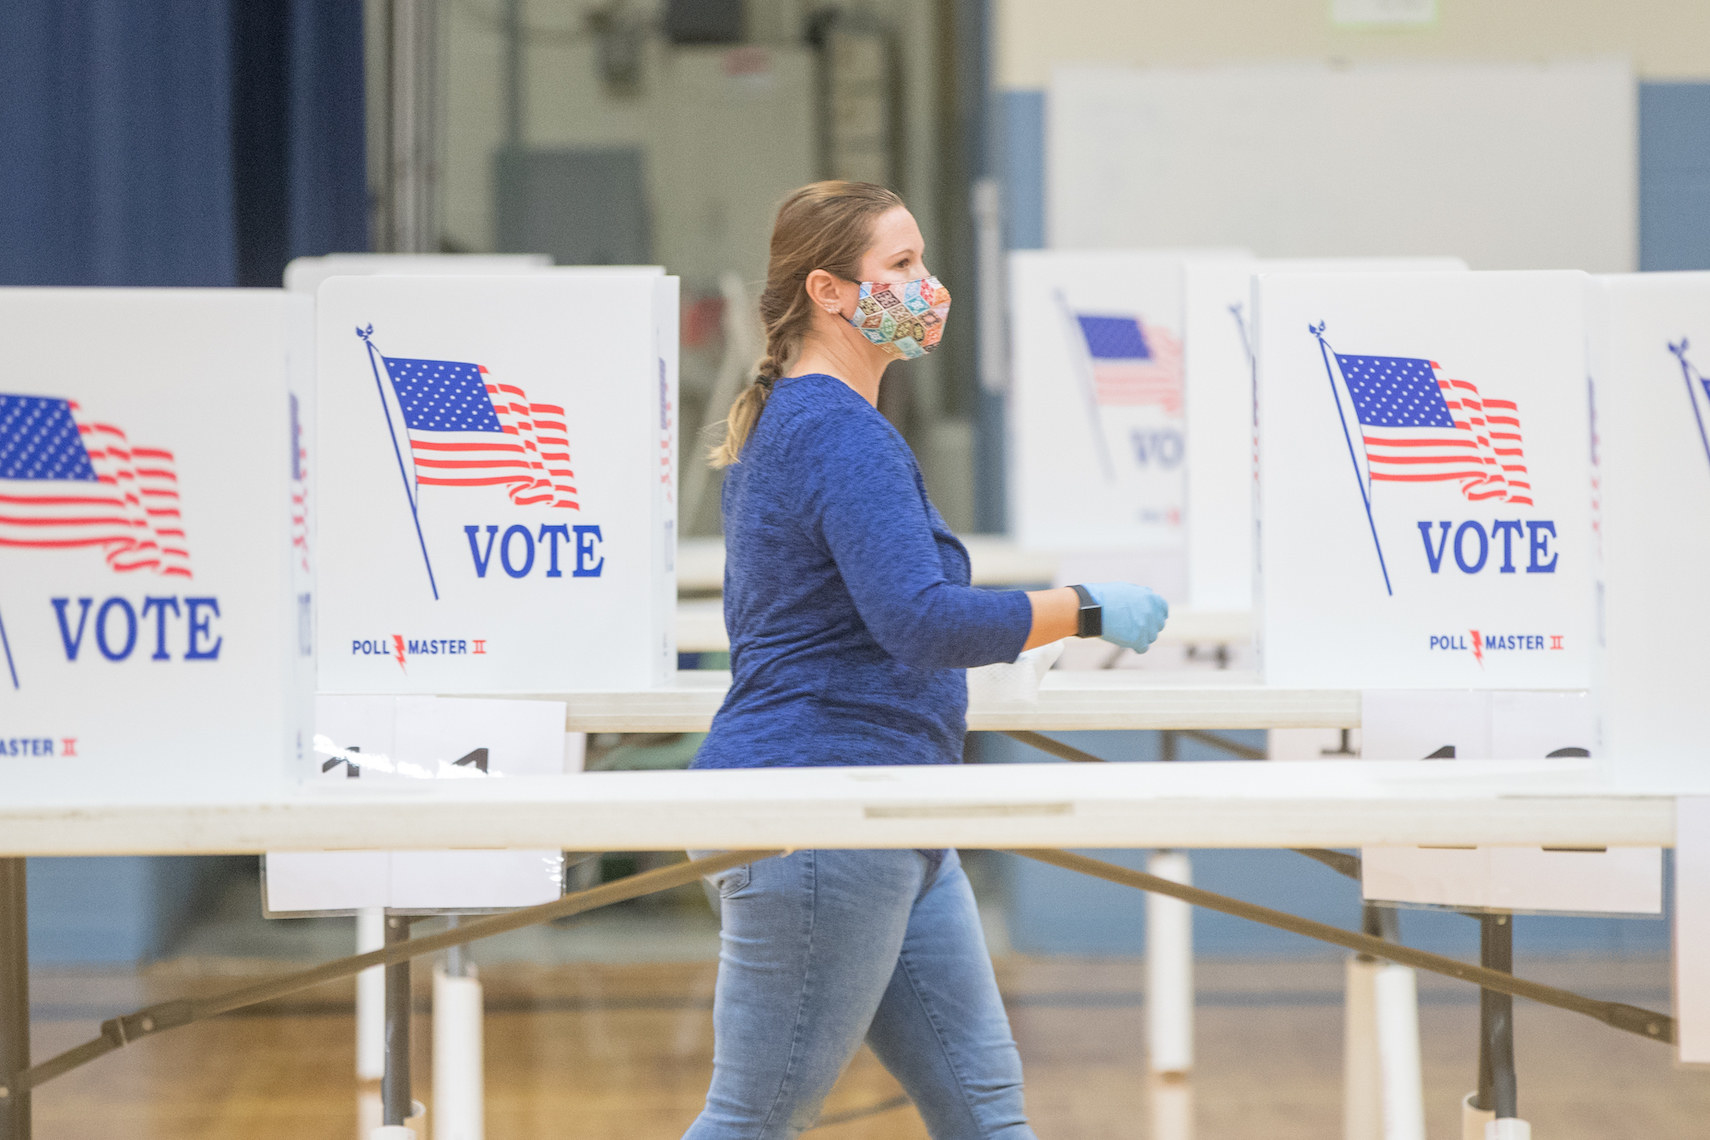 A poll worker walking by several empty voting booths